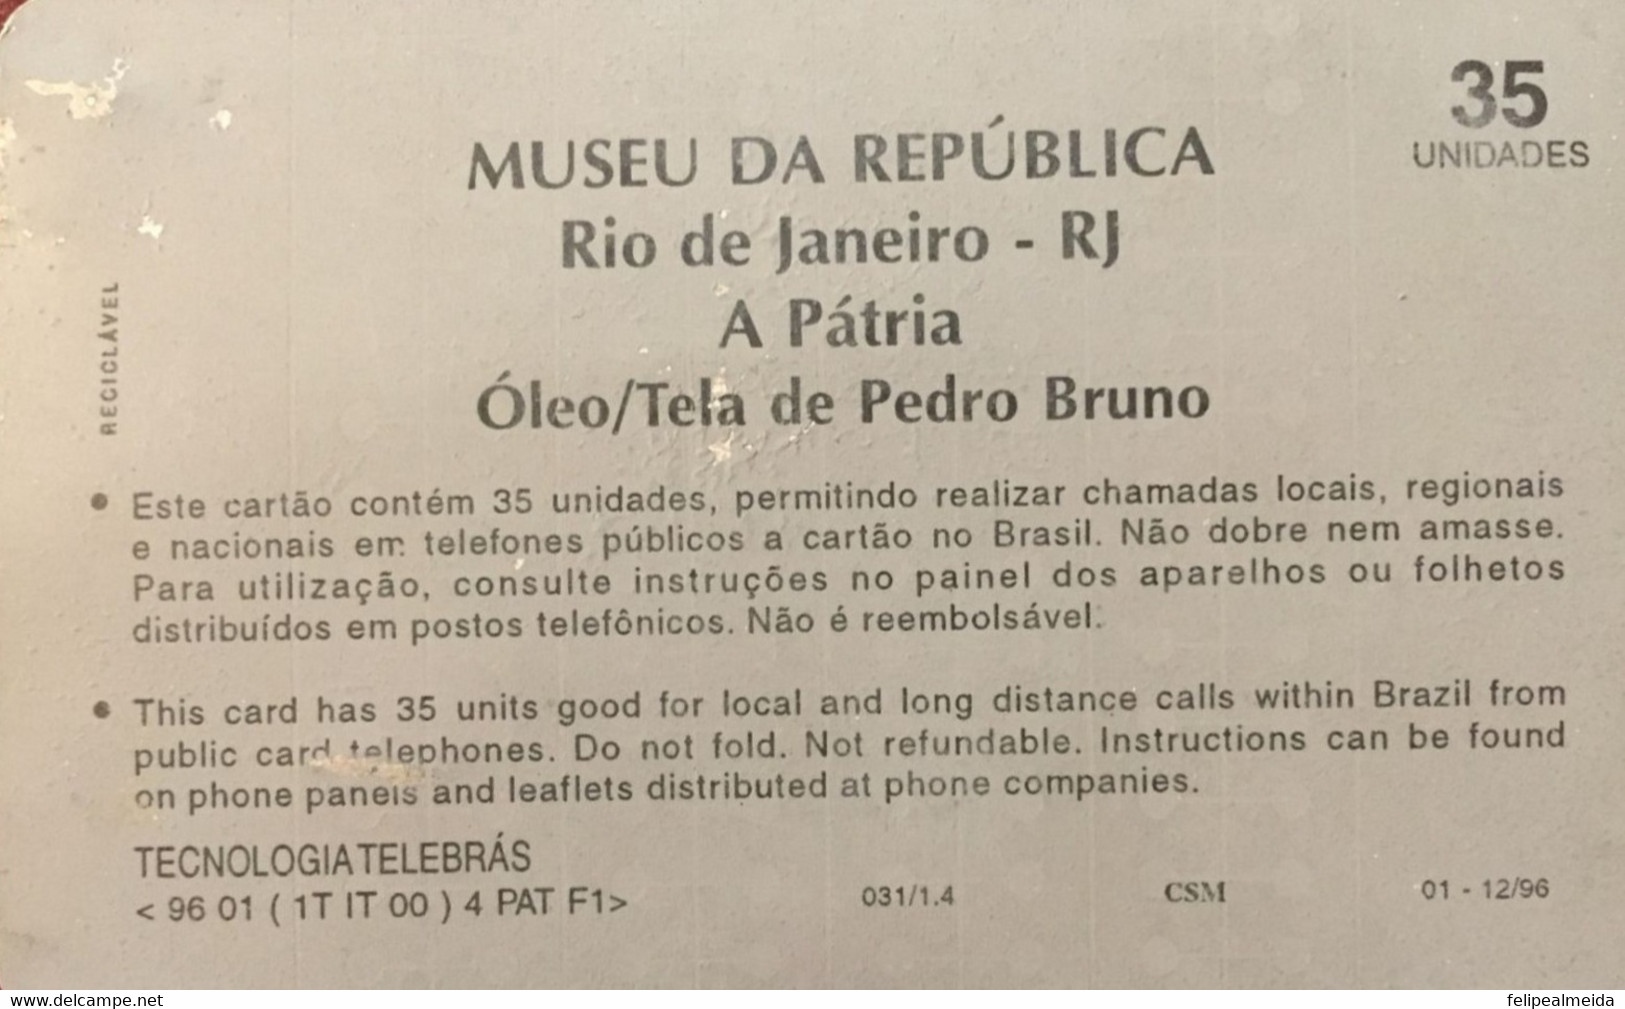 Phone Card Manufactured By Telebras In 1996 - Series Museums - Painting A Pátria - Painter Pedro Bruno - Exhibited At Th - Painting